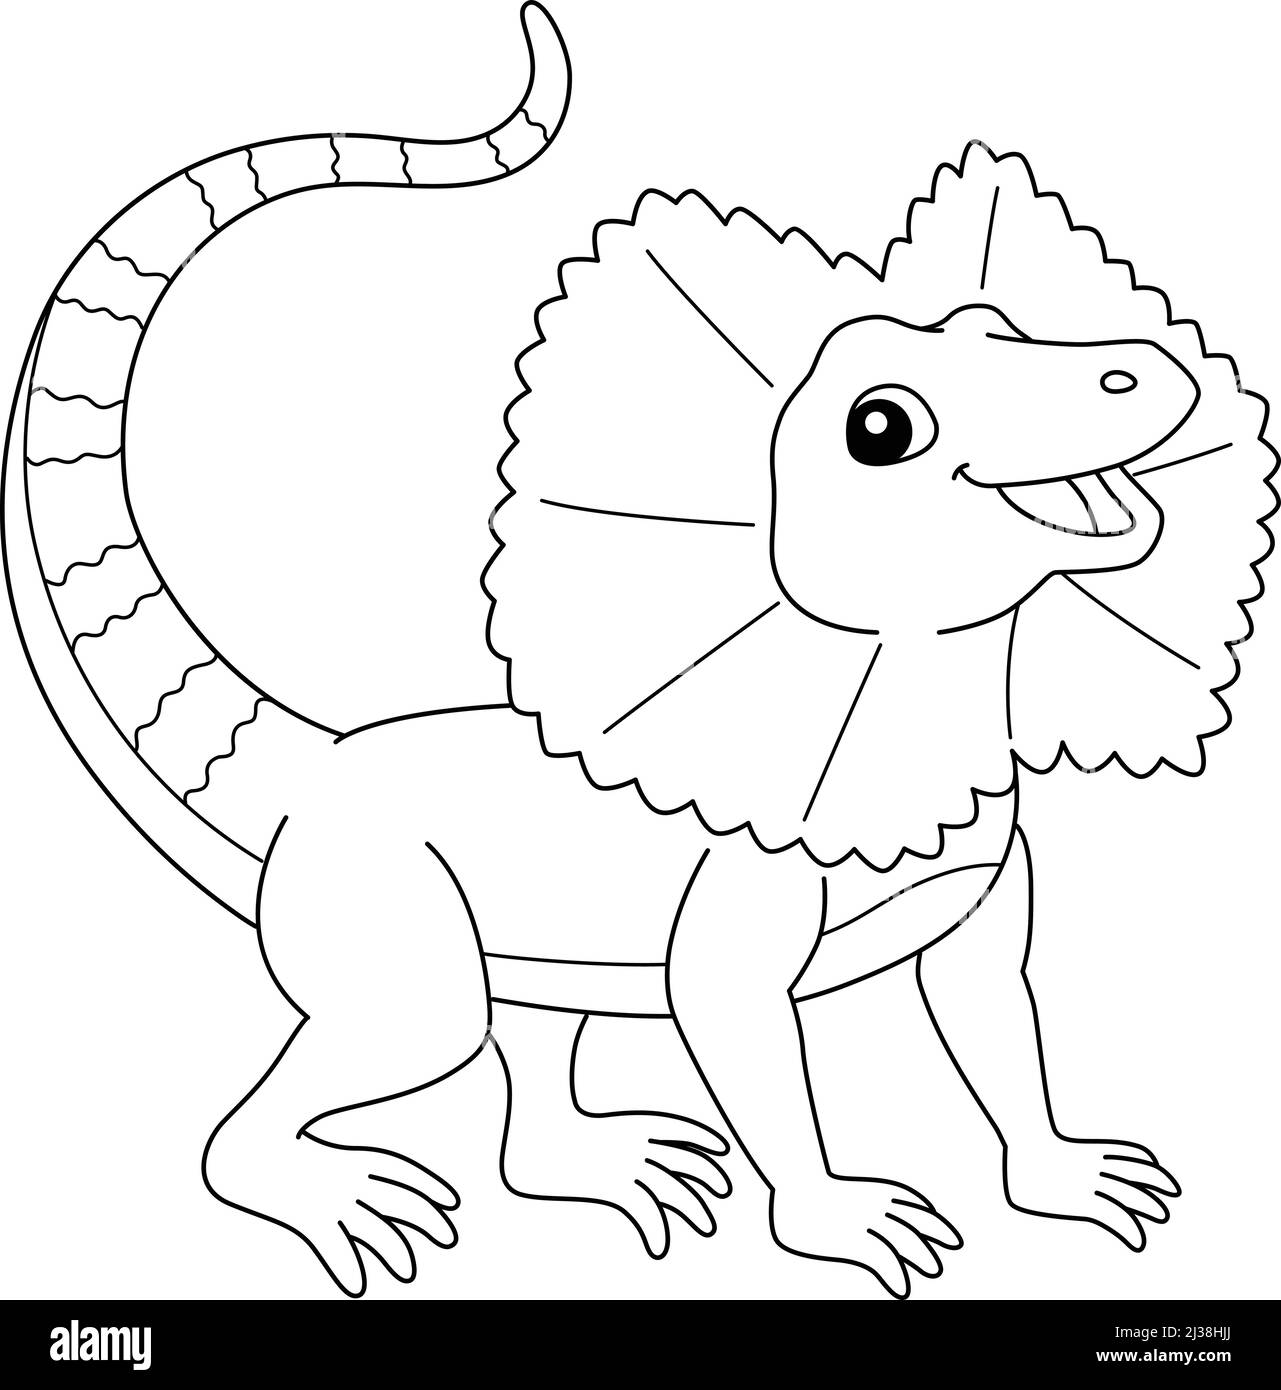 Frill Necked Lizard Coloring Page Isolated Stock Vector